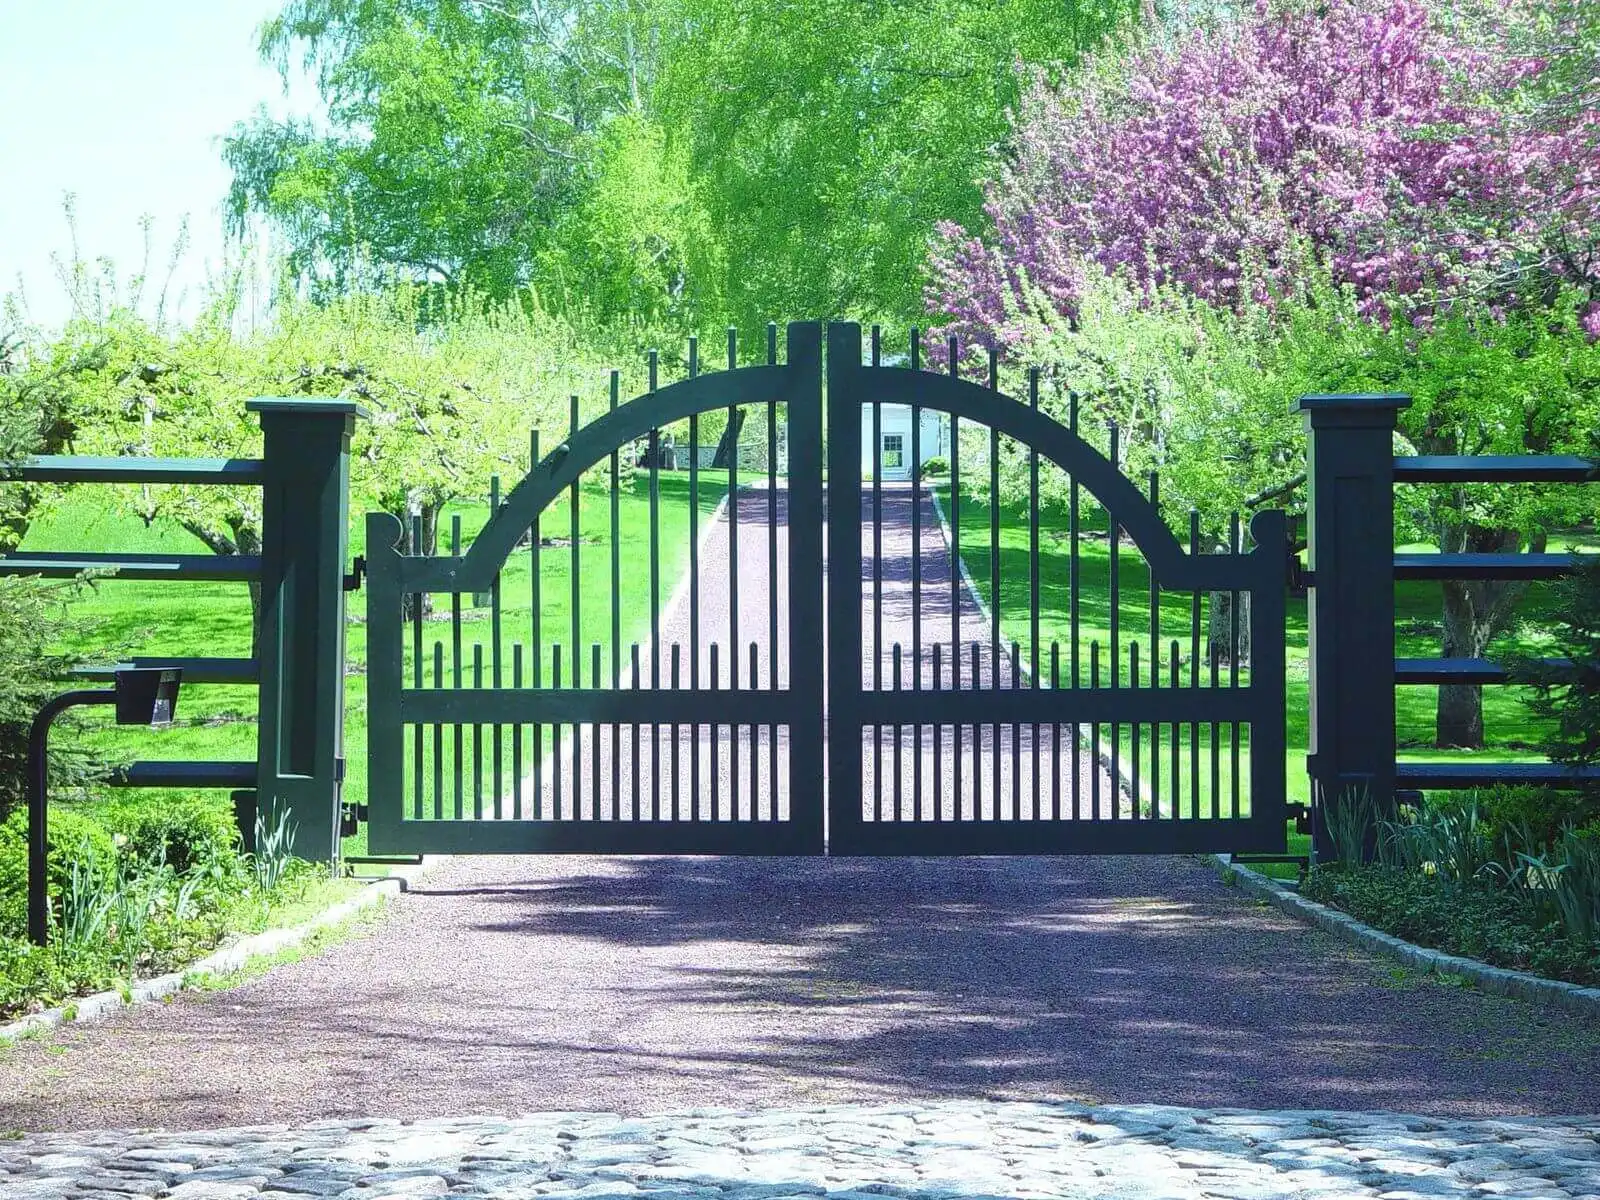 A modern arched wooden security gate painted dark green stands at the entrance to a garden.